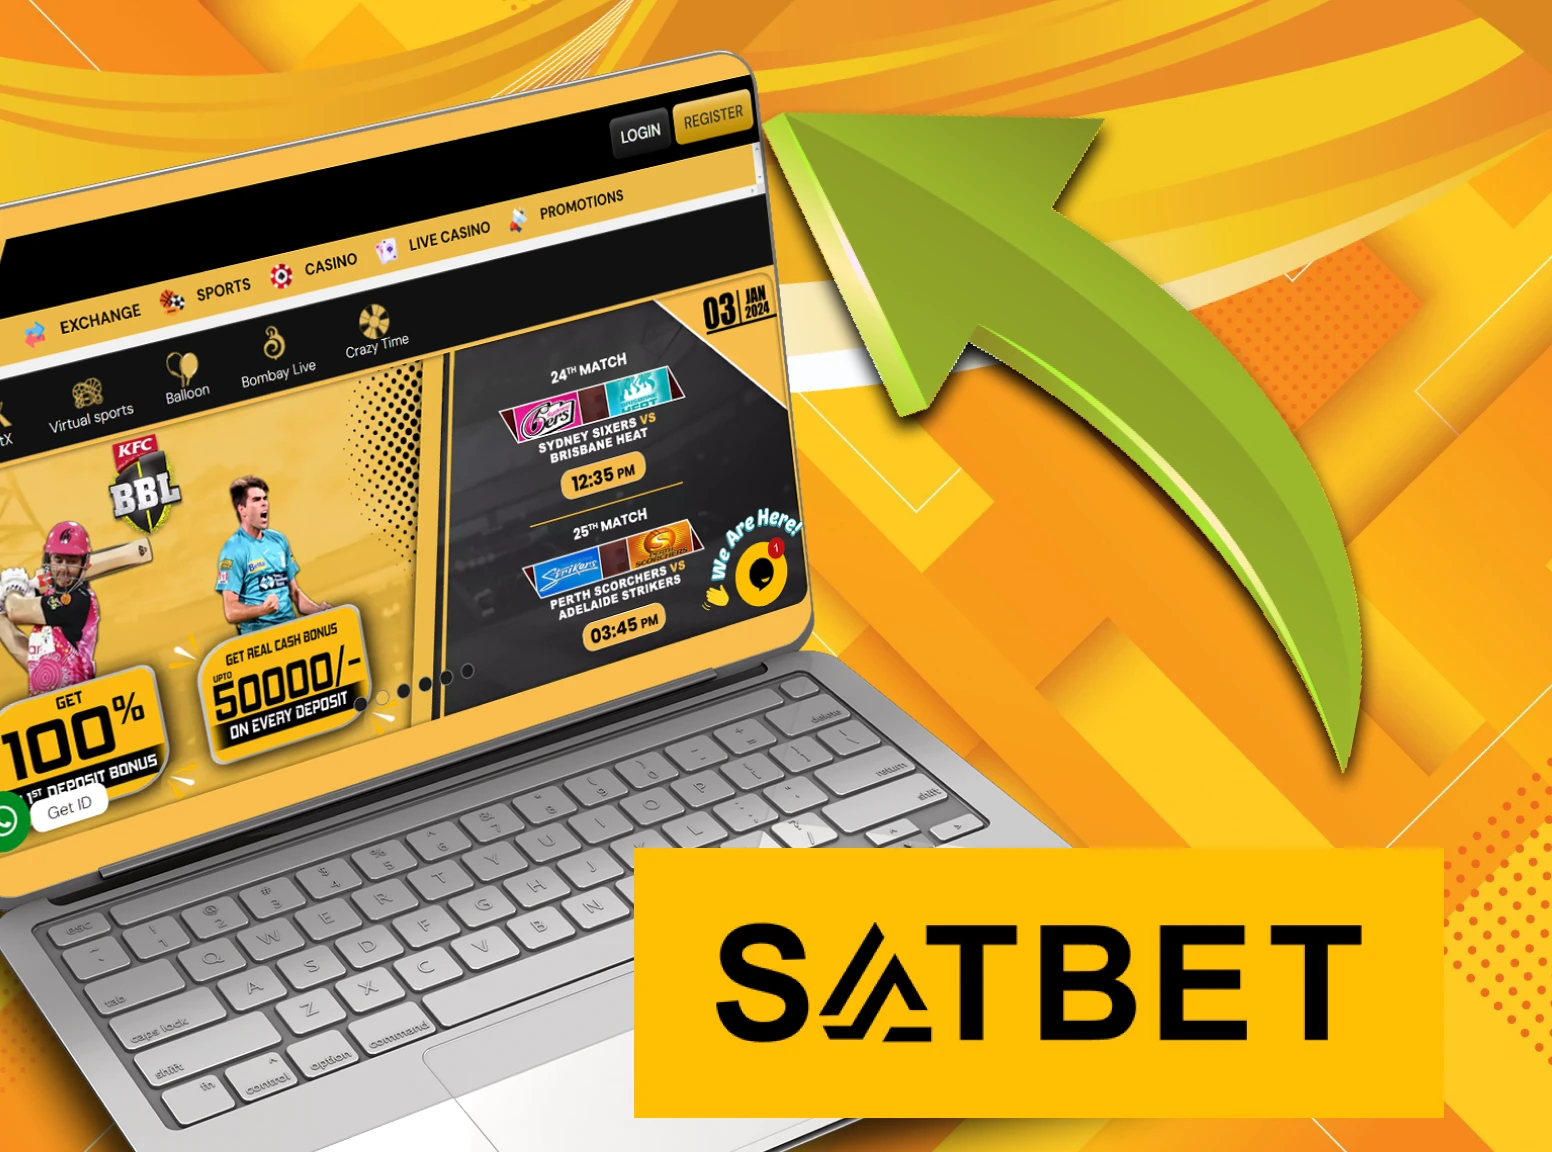 To receive a bonus from a promotional code, start registering at Satbet.